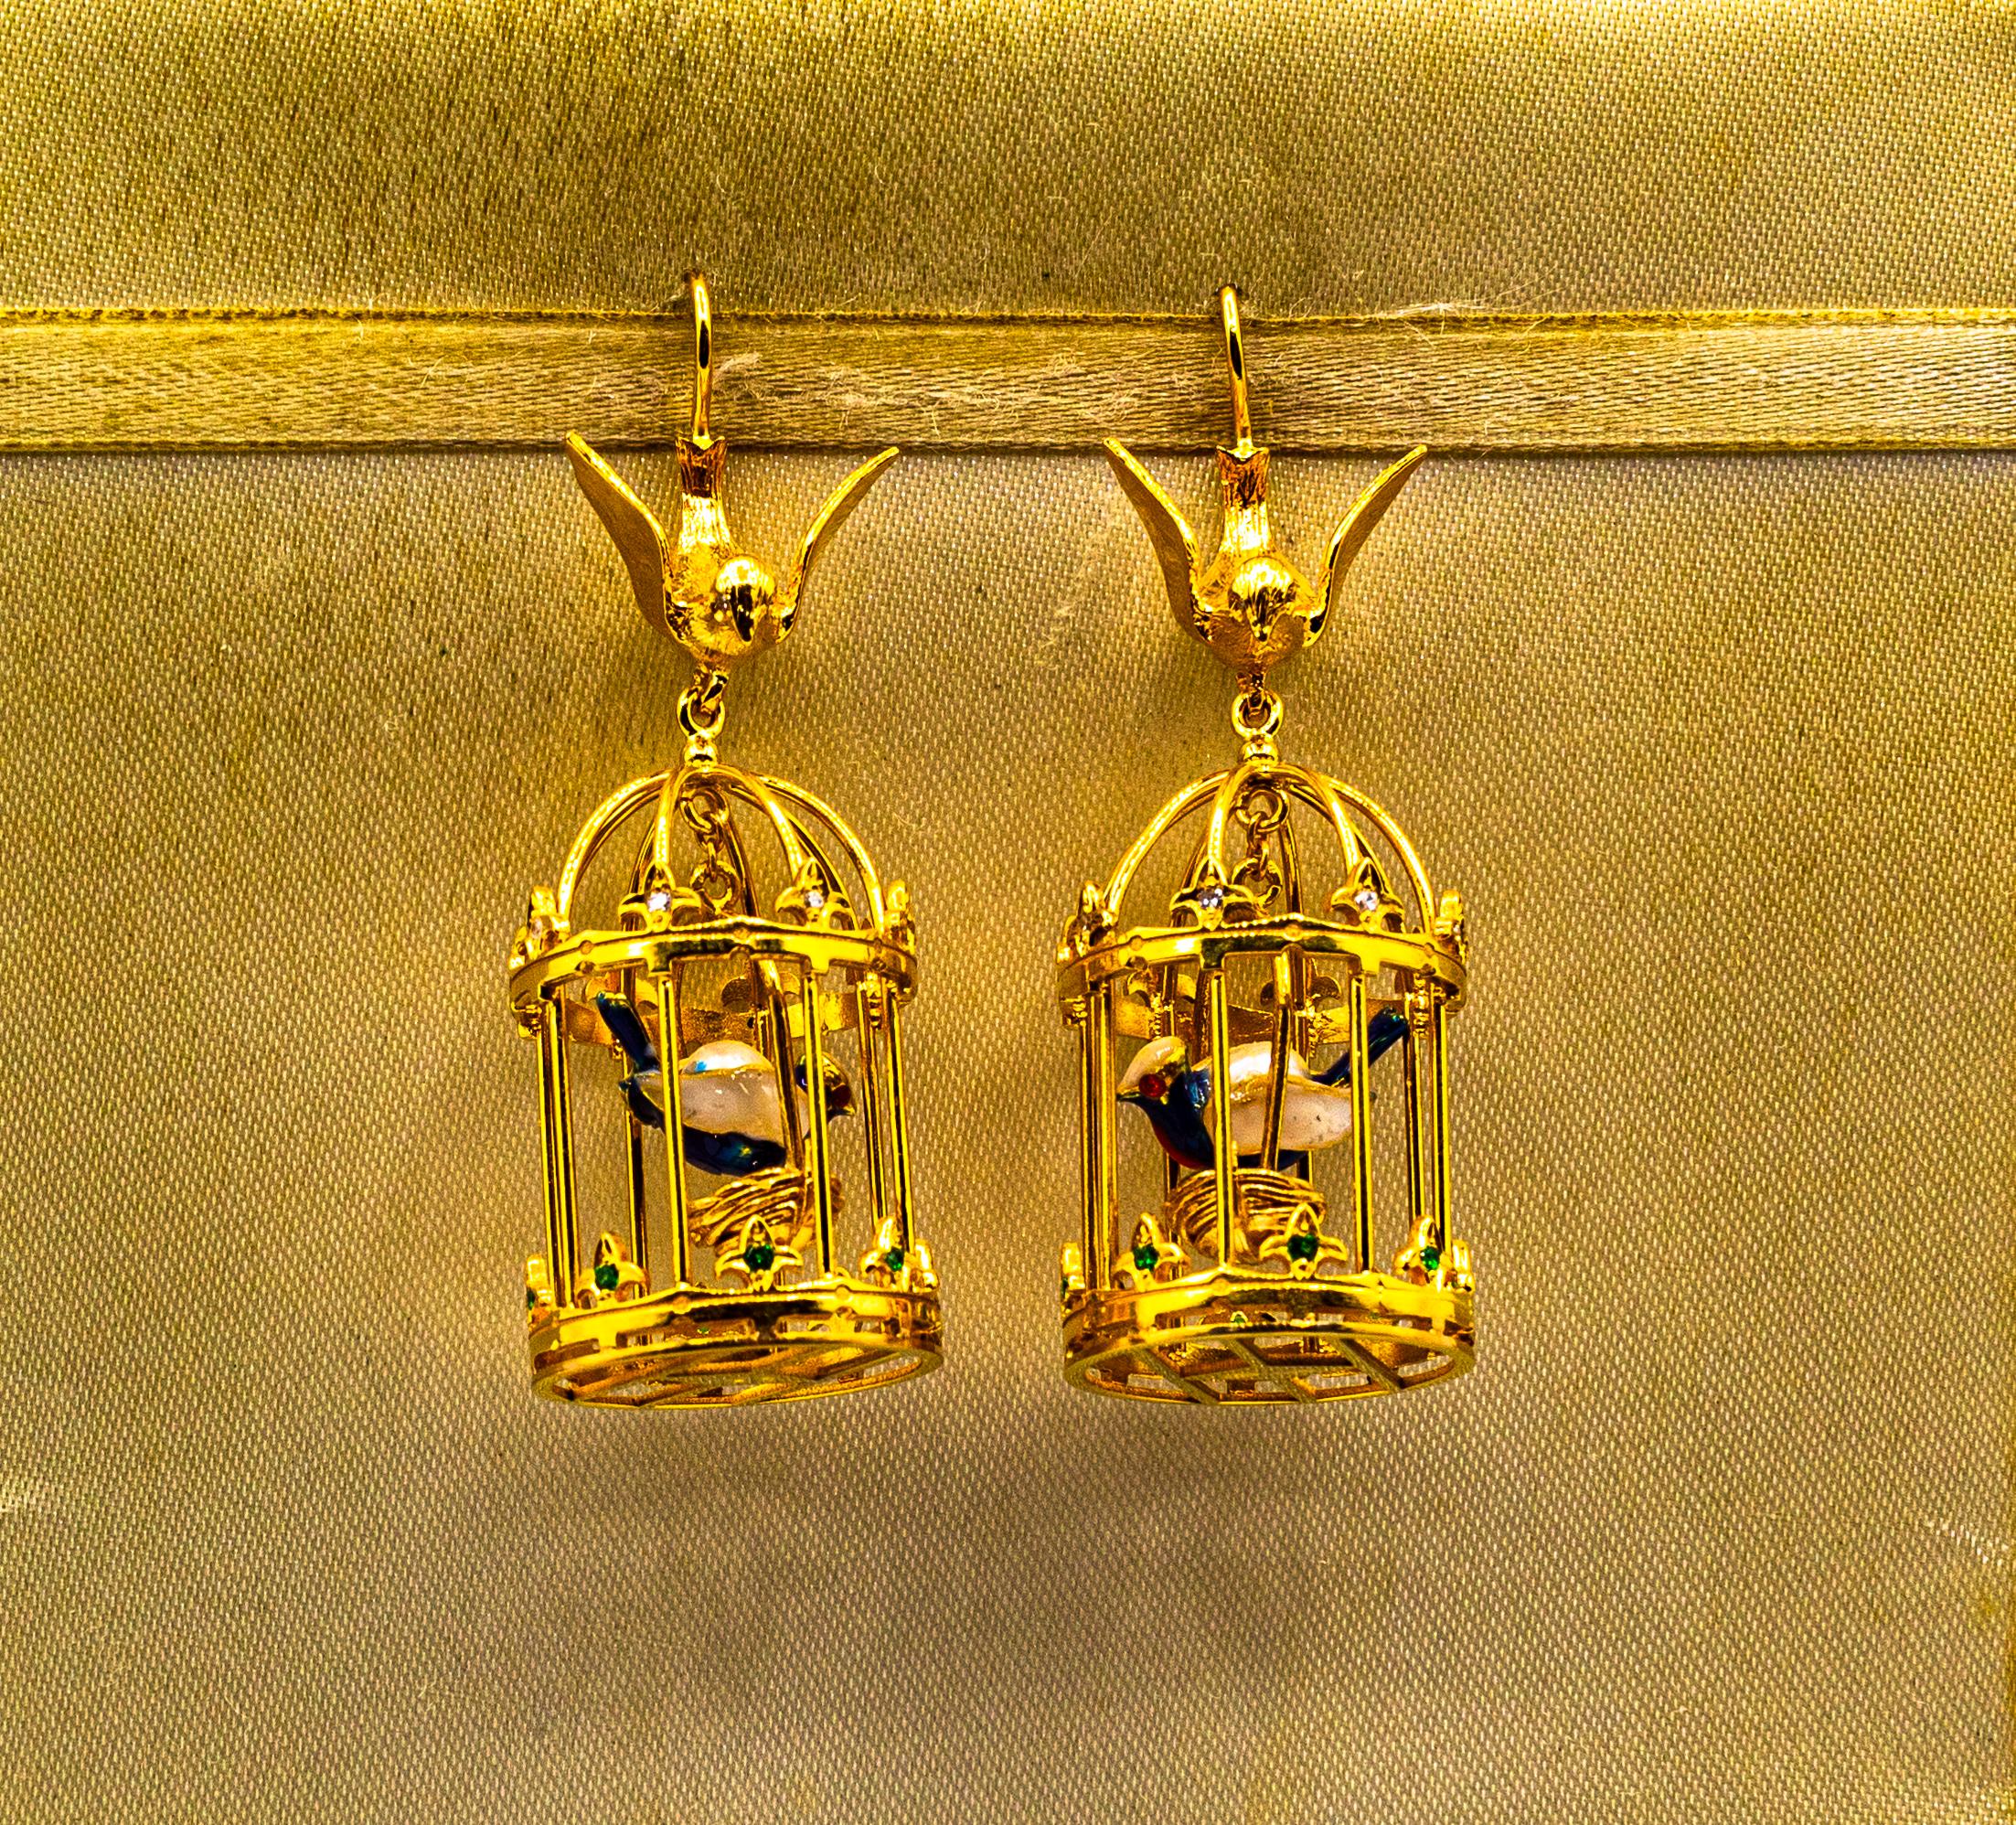 These Stud Earrings are made of 9K Yellow Gold.
These Earrings have 0.20 Carats of White Brilliant Cut Diamonds.
These Earrings have 0.16 Carats of Tsavorite.
These Earrings have also Enamel and Pearls.

All our Earrings have pins for pierced ears